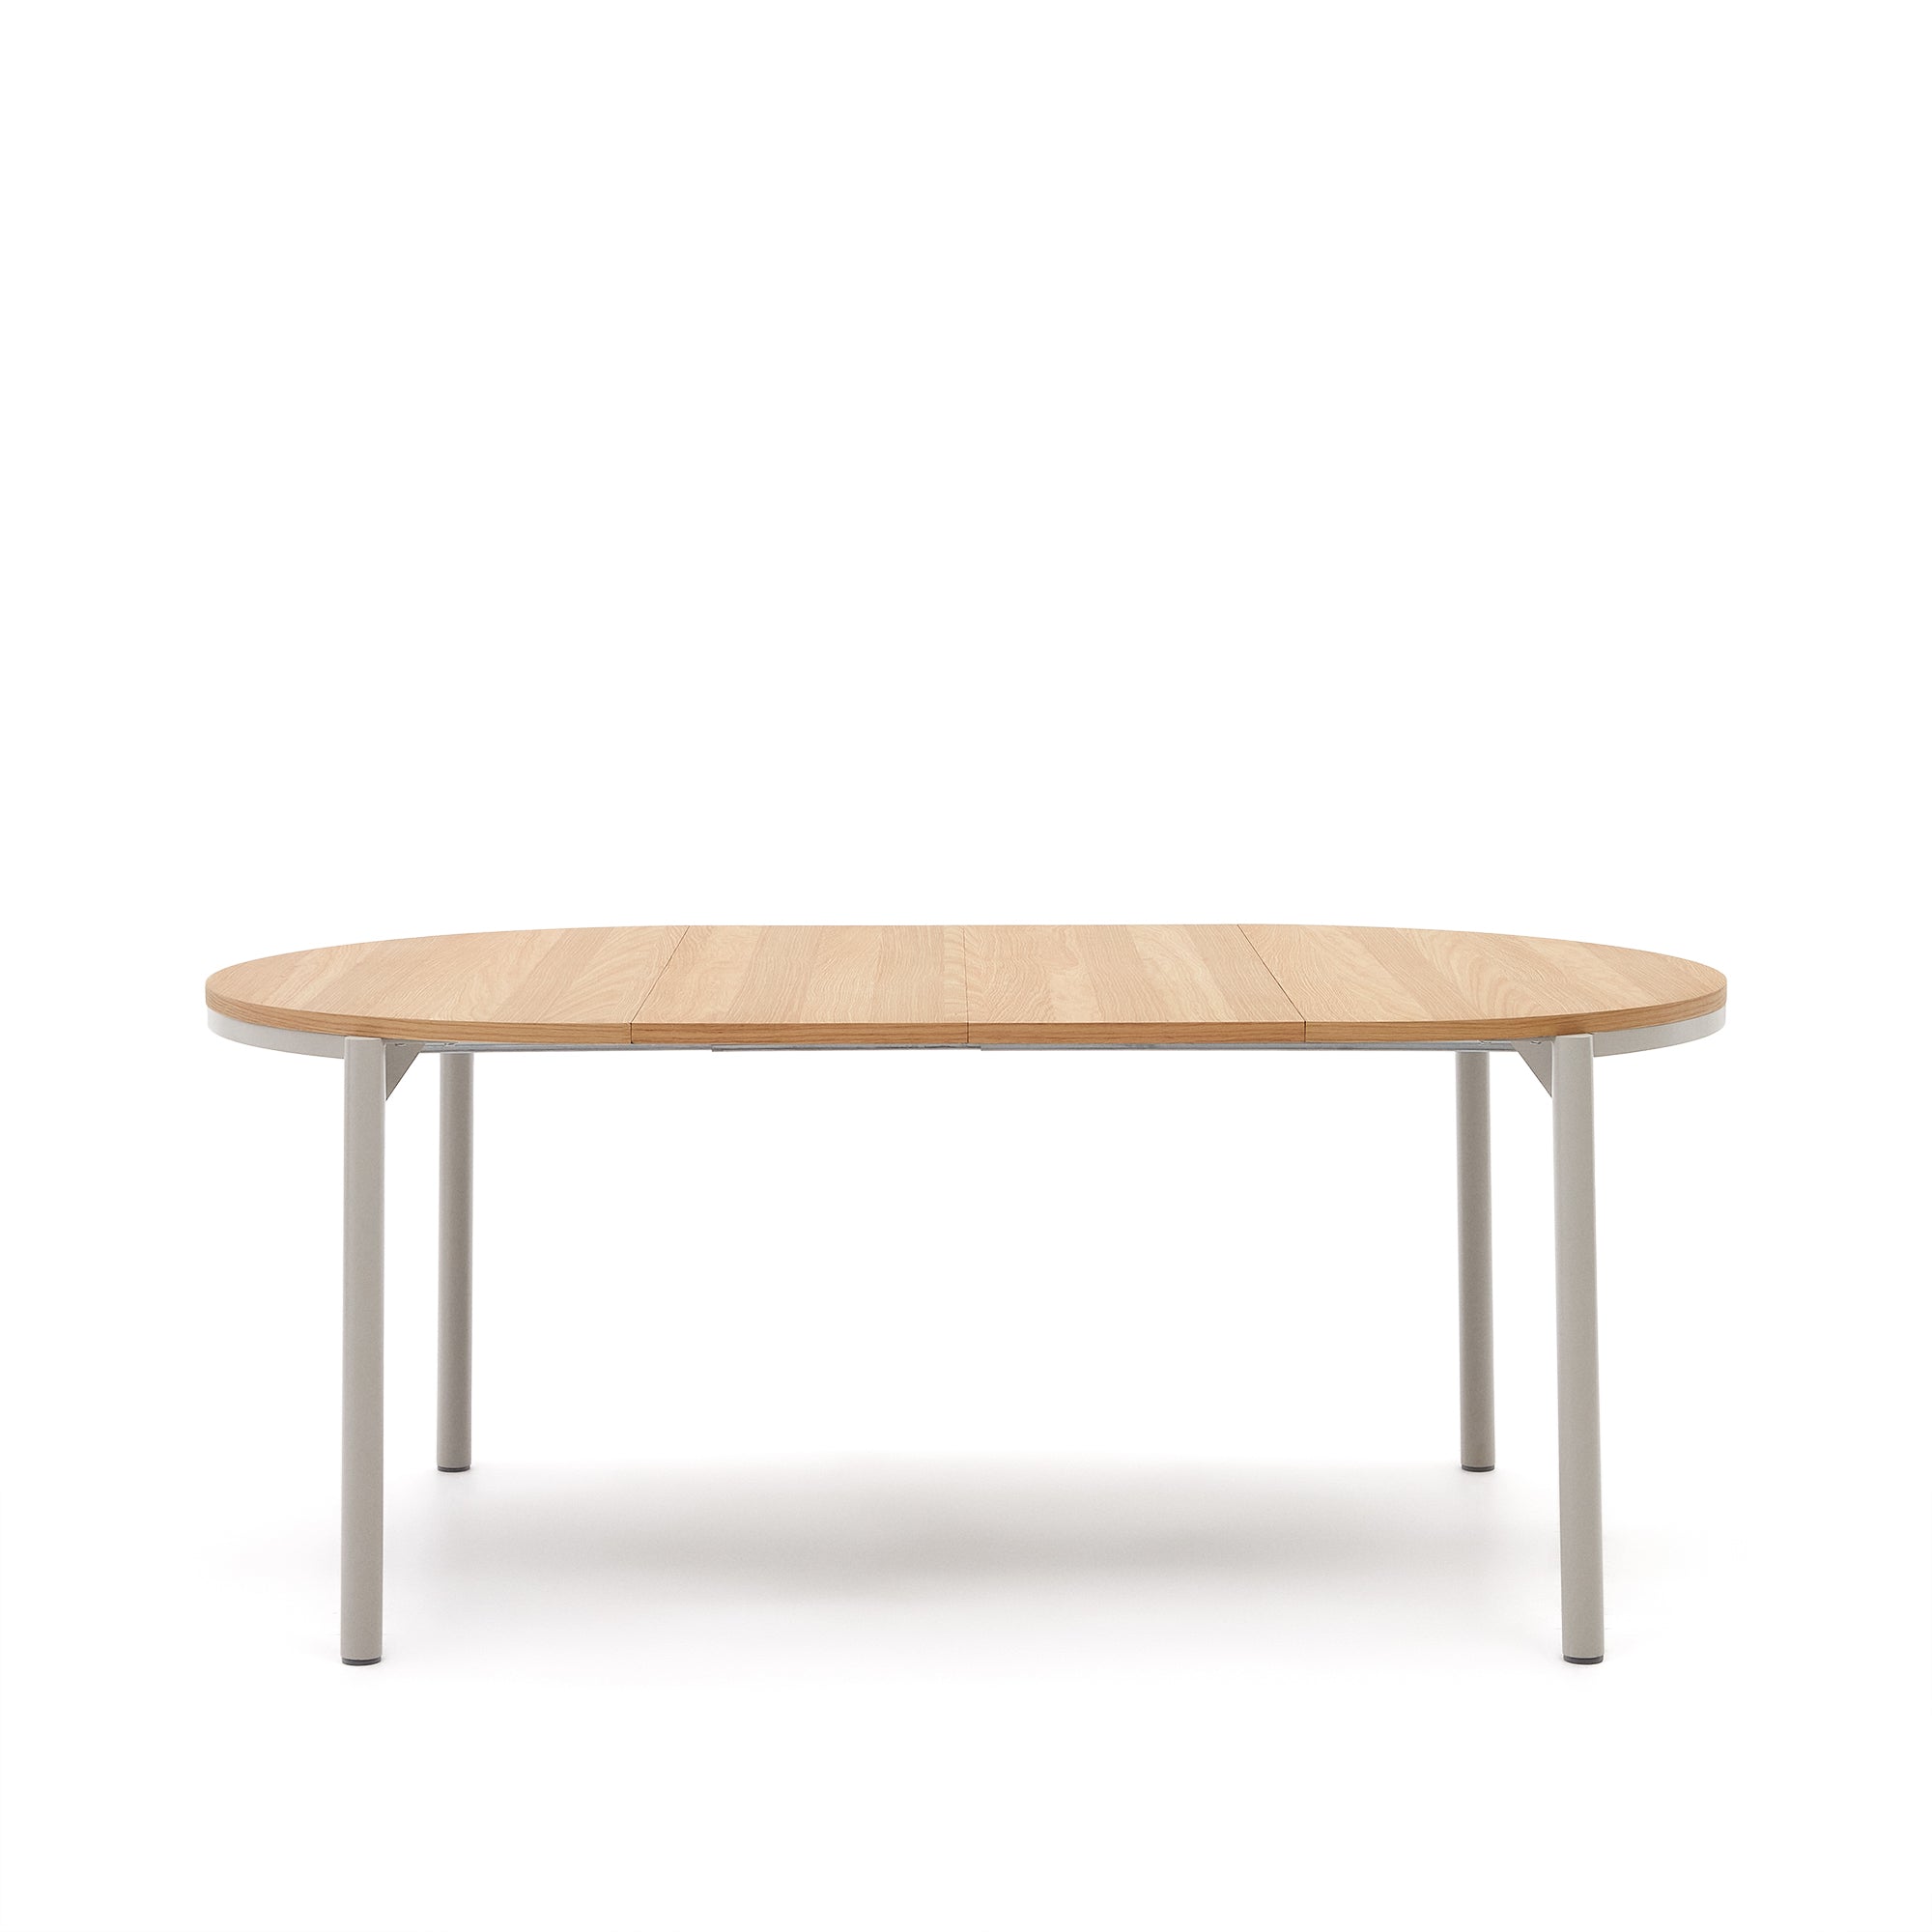 Montuiri extendable round table in oak veneer and steel legs with grey finish, Ø 120 (200) cm